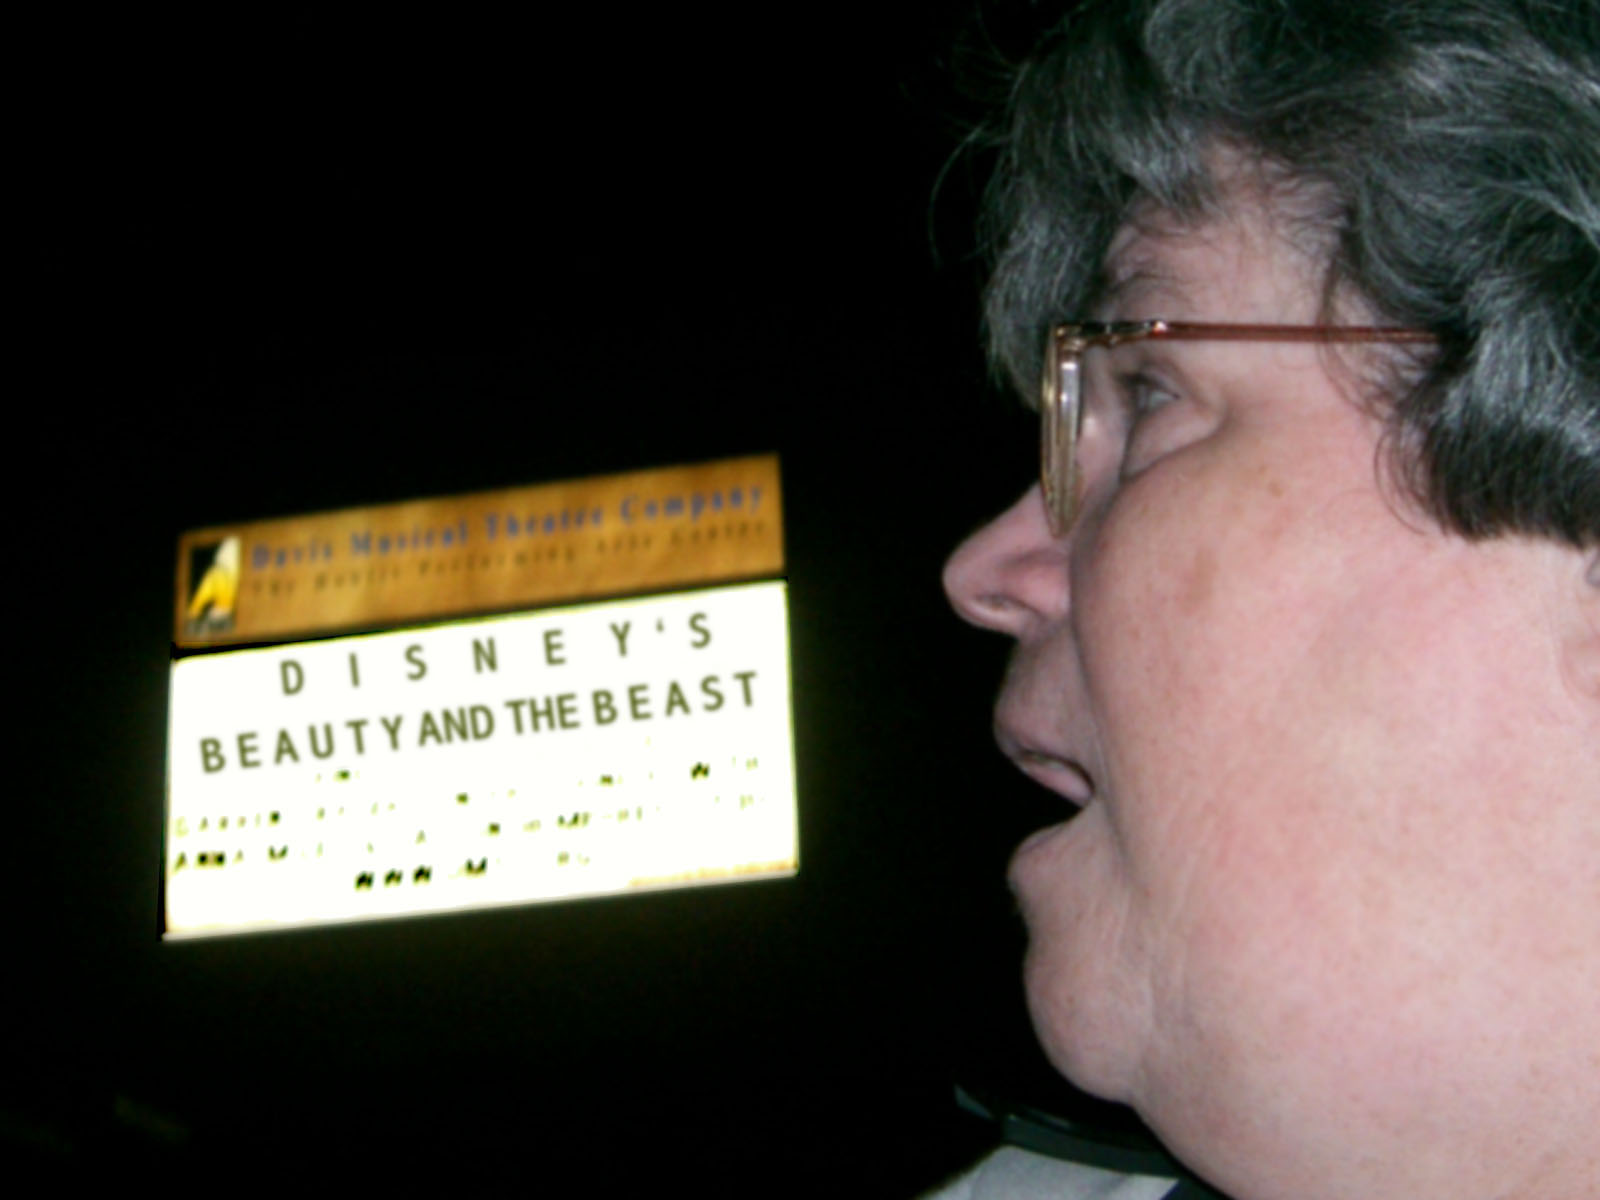 a woman talking while looking at a sign in the dark